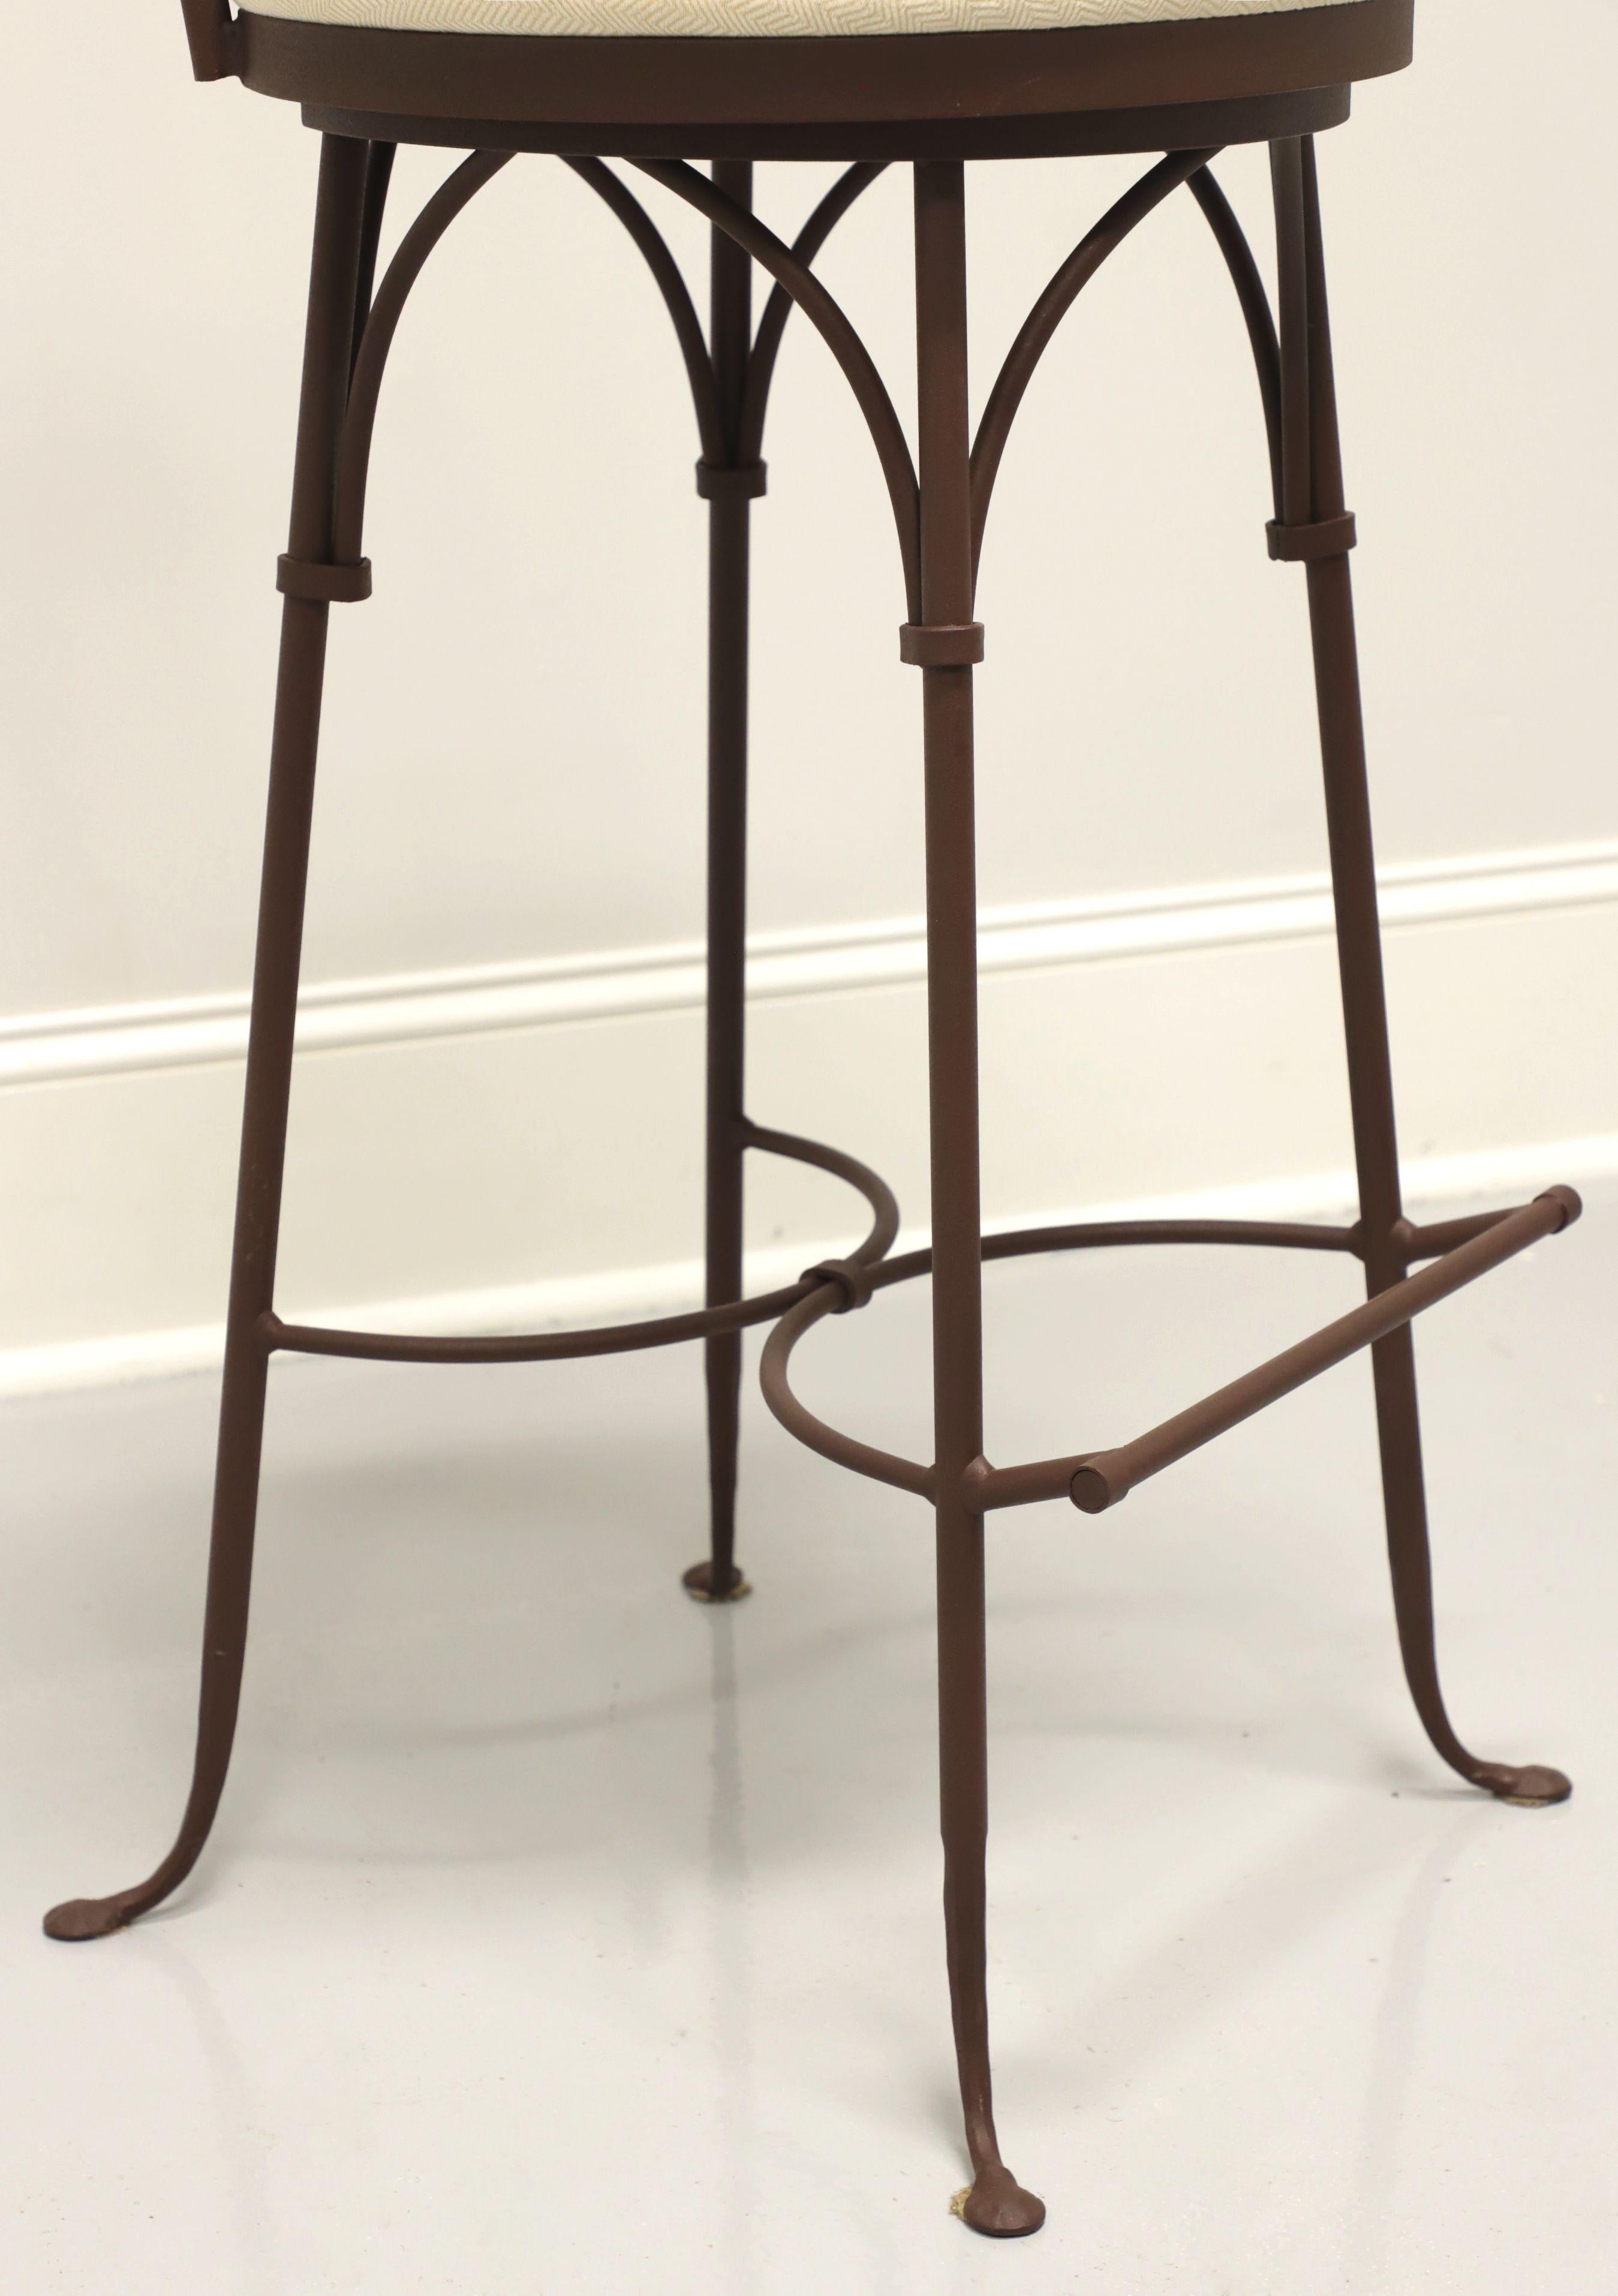 CHARLESTON FORGE Wrought Iron Shaker Arch Bar Height Swivel Stools - Pair B In Good Condition For Sale In Charlotte, NC